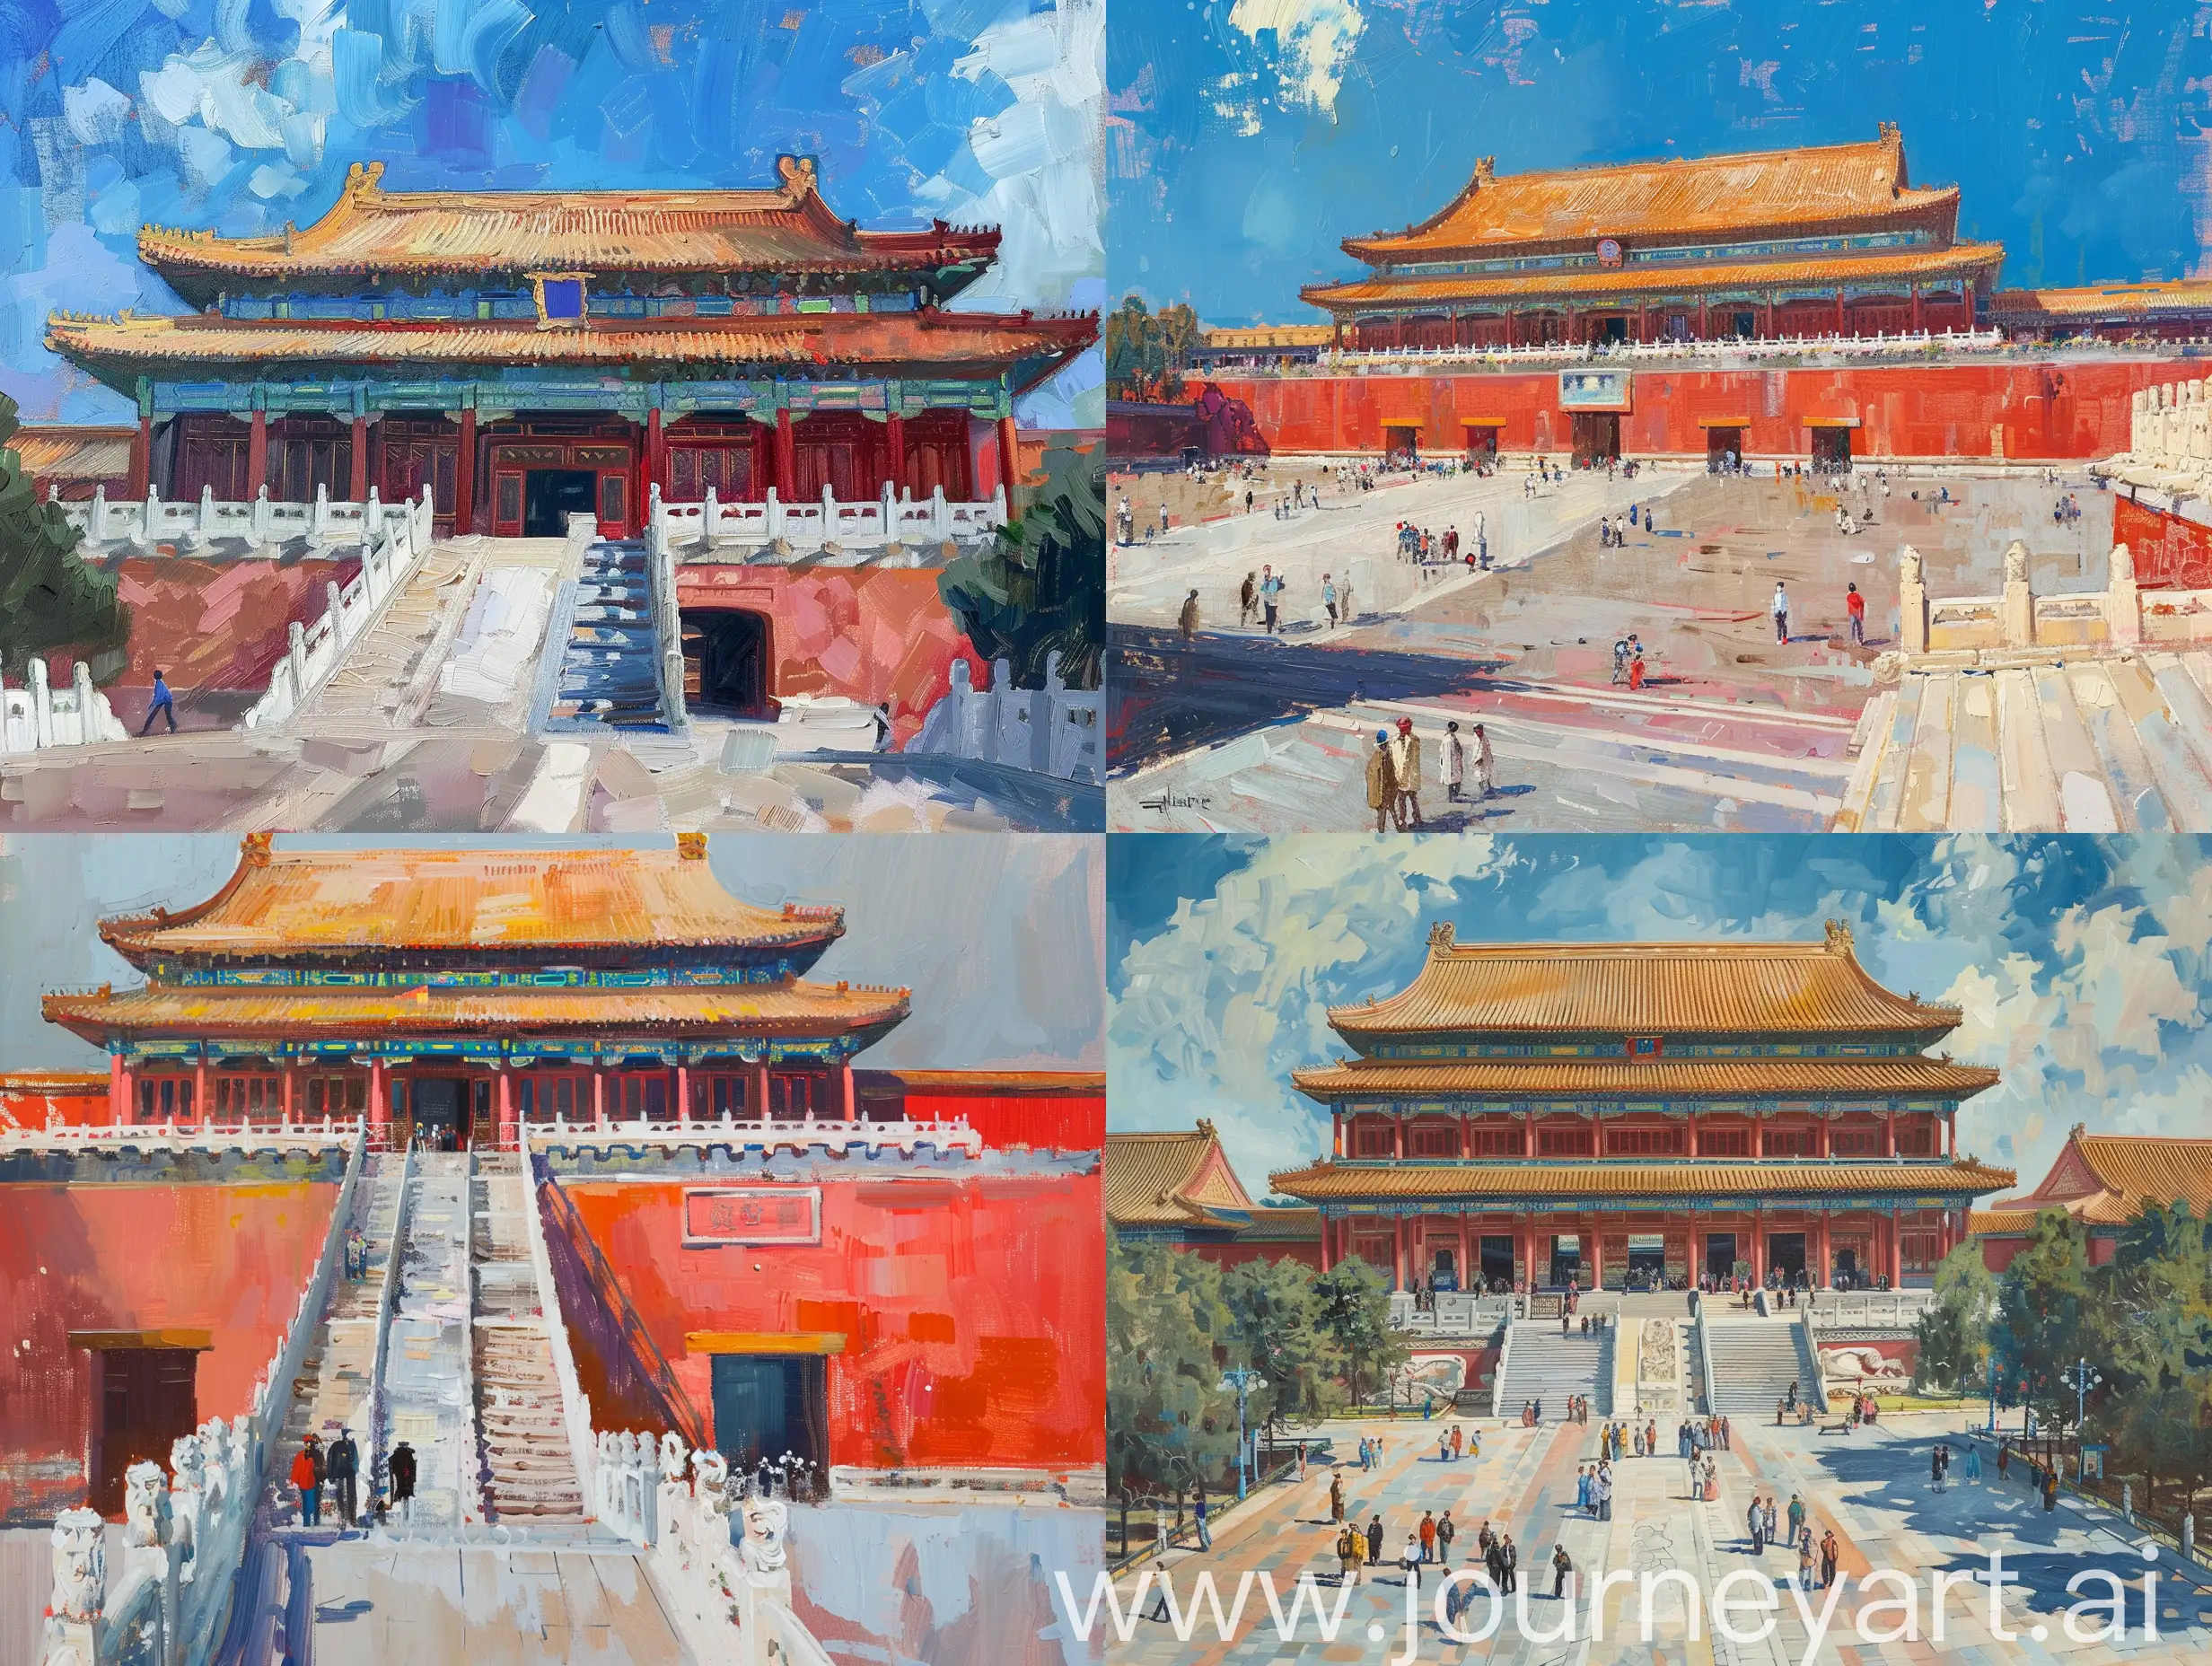 The-Majestic-Palace-Museum-in-Beijing-Captured-in-Oil-Painting-Splendor